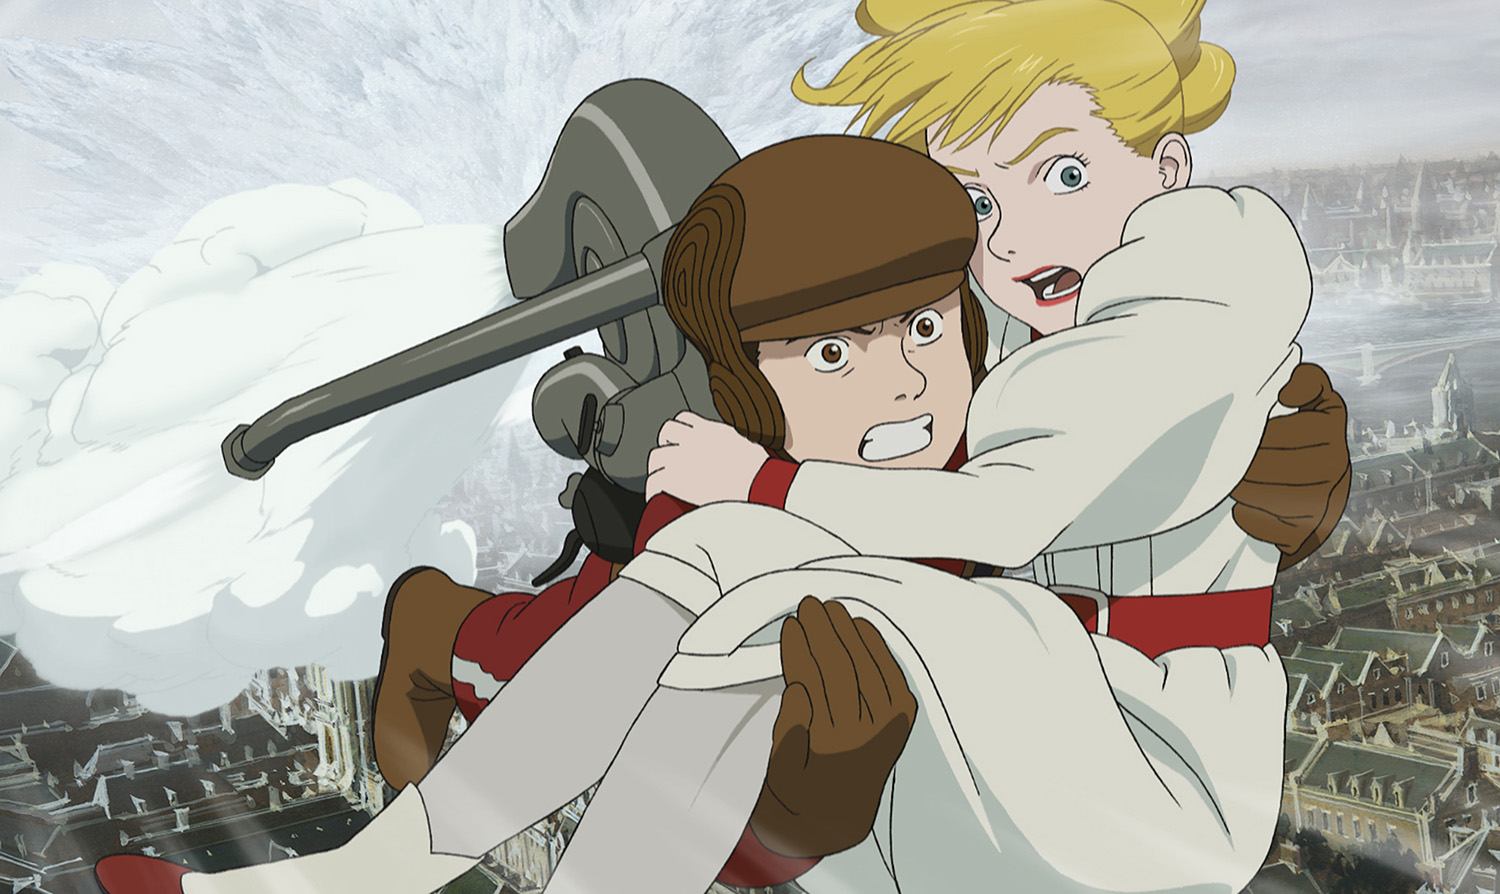 action-packed scene in steamboy